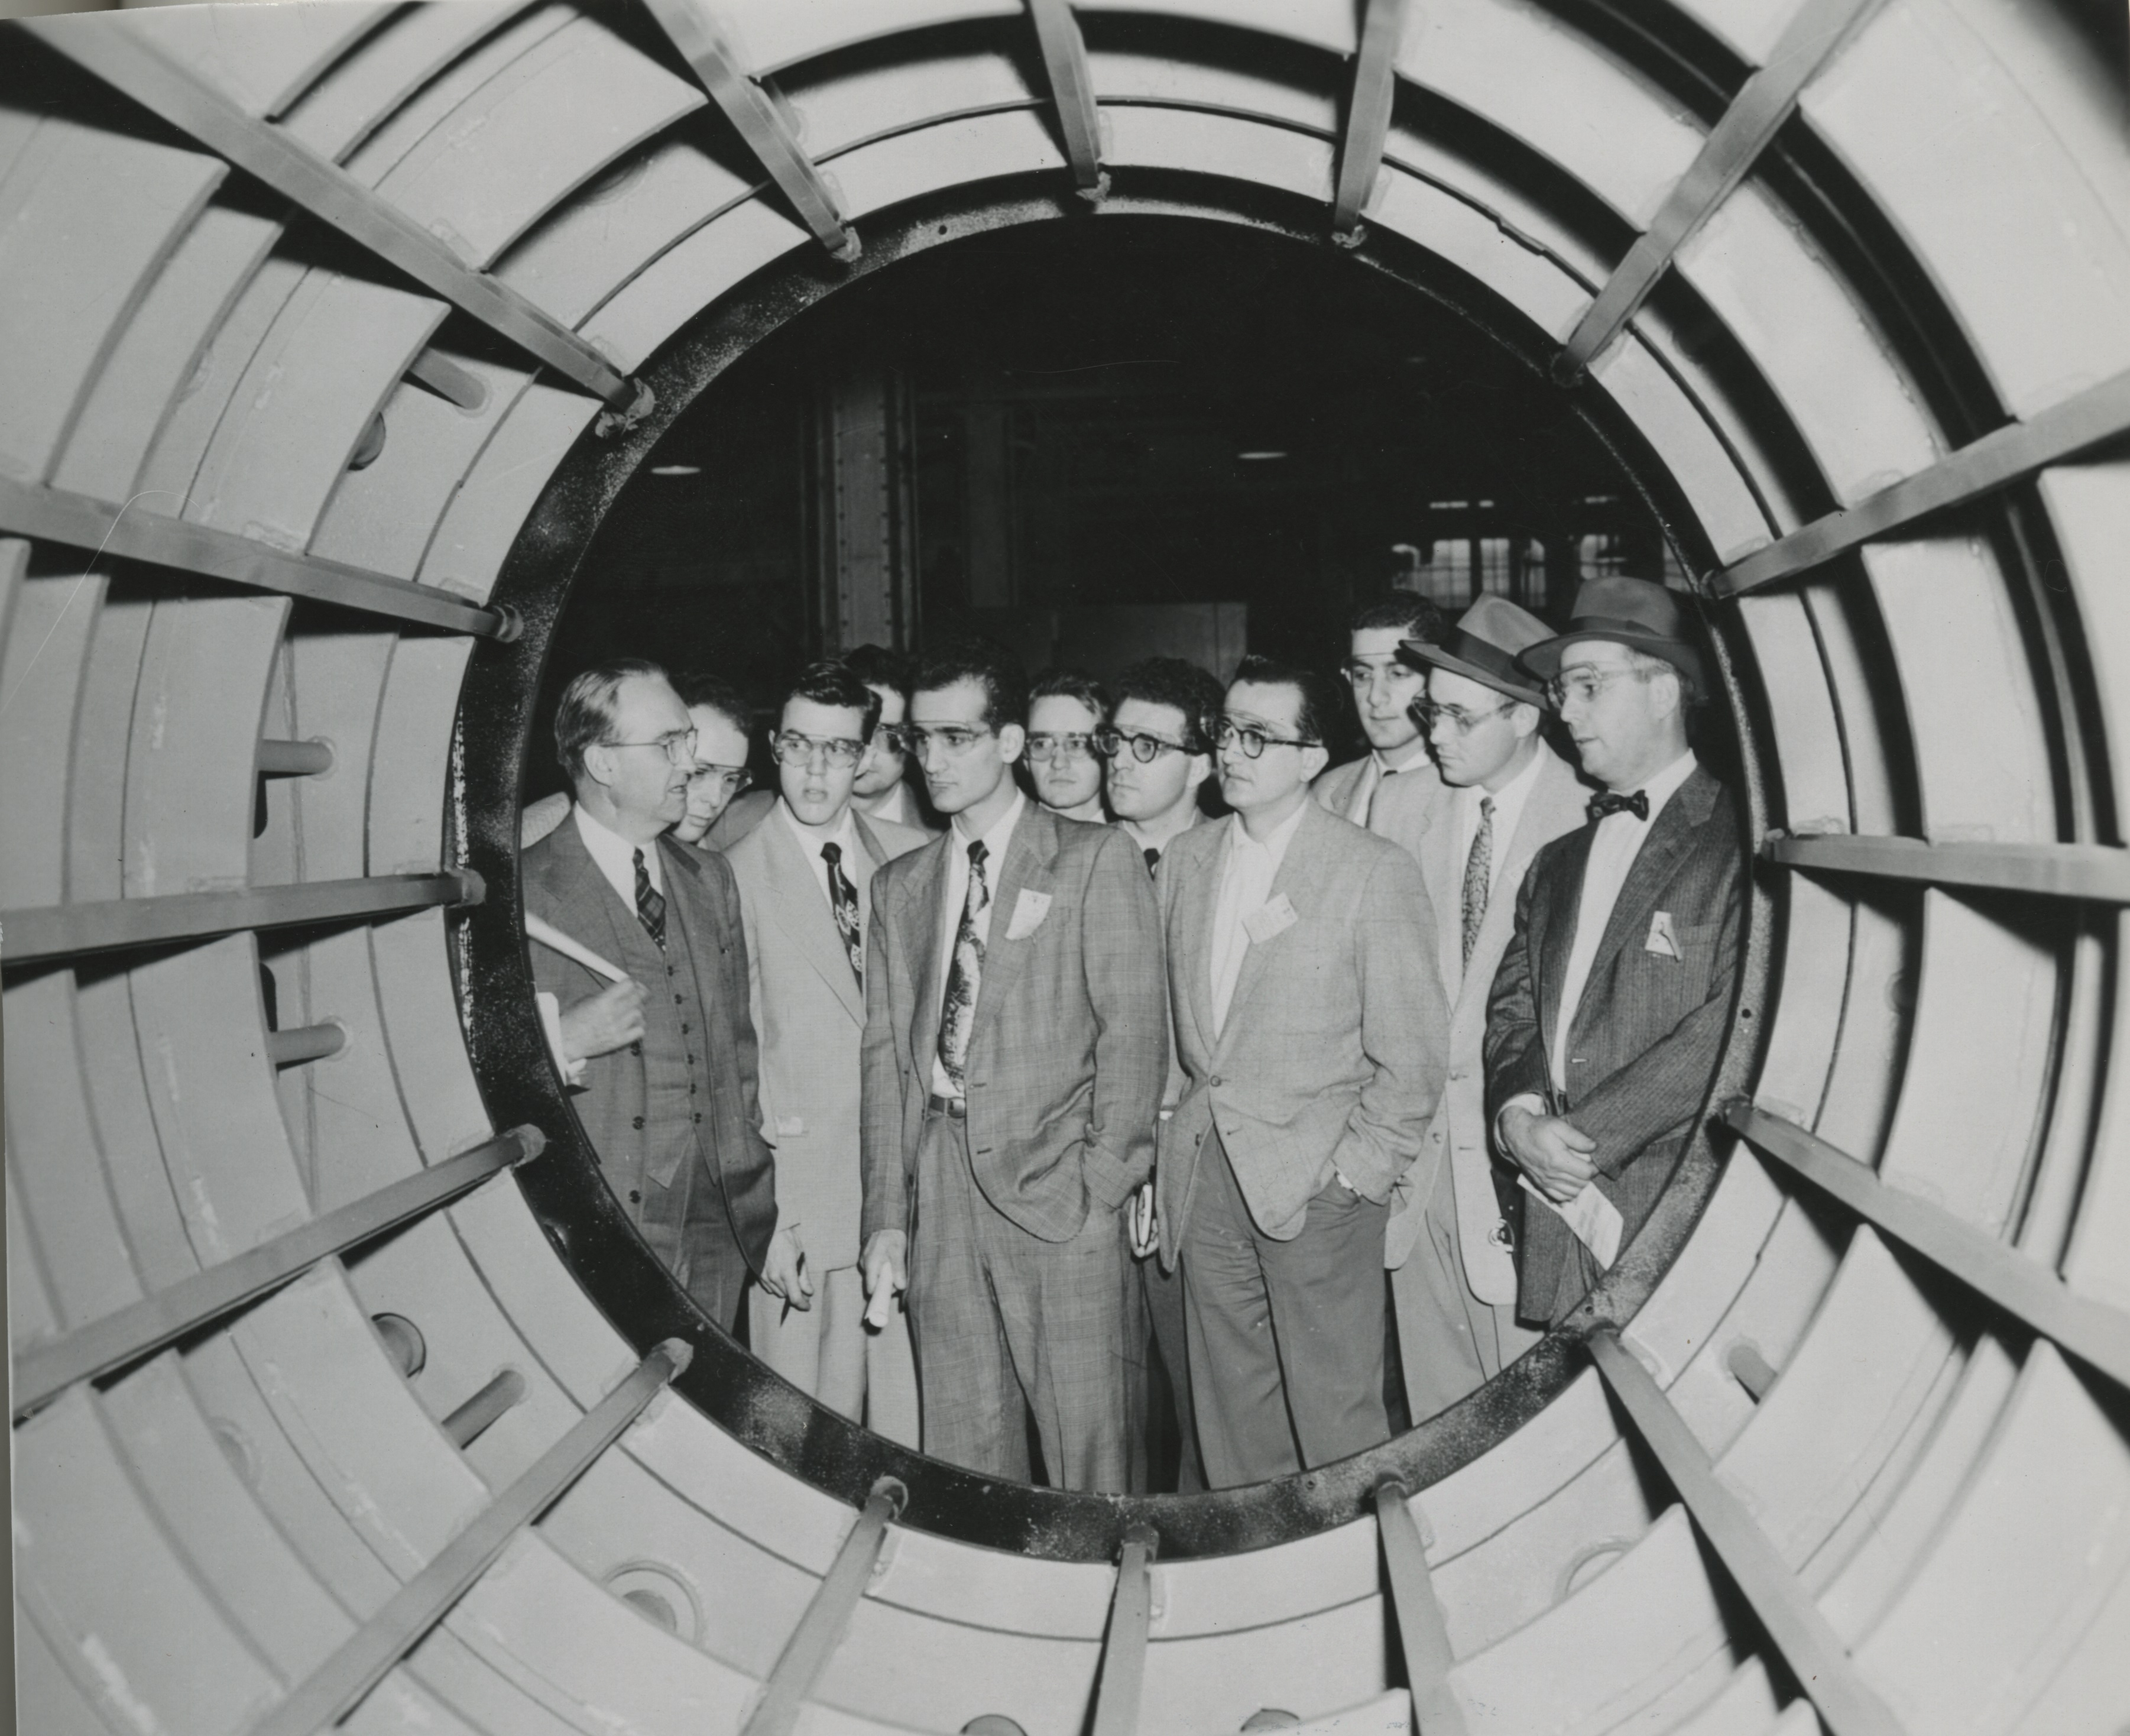 A group of white male students in suits and protective eyewear examine the inside of a large cylinder-shaped generator